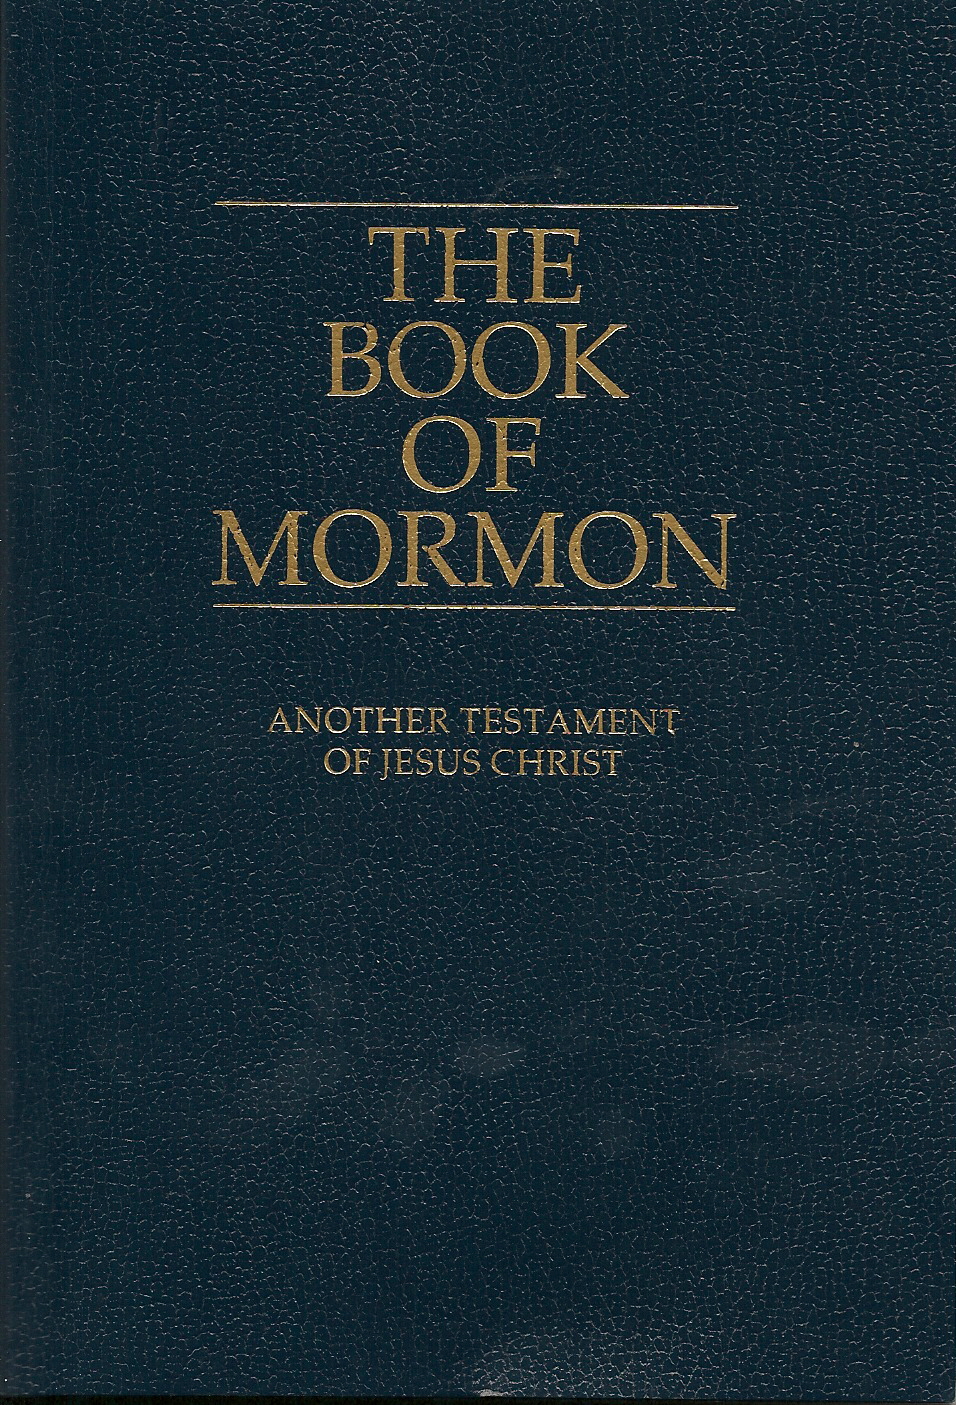 clipart of the book of mormon - photo #19